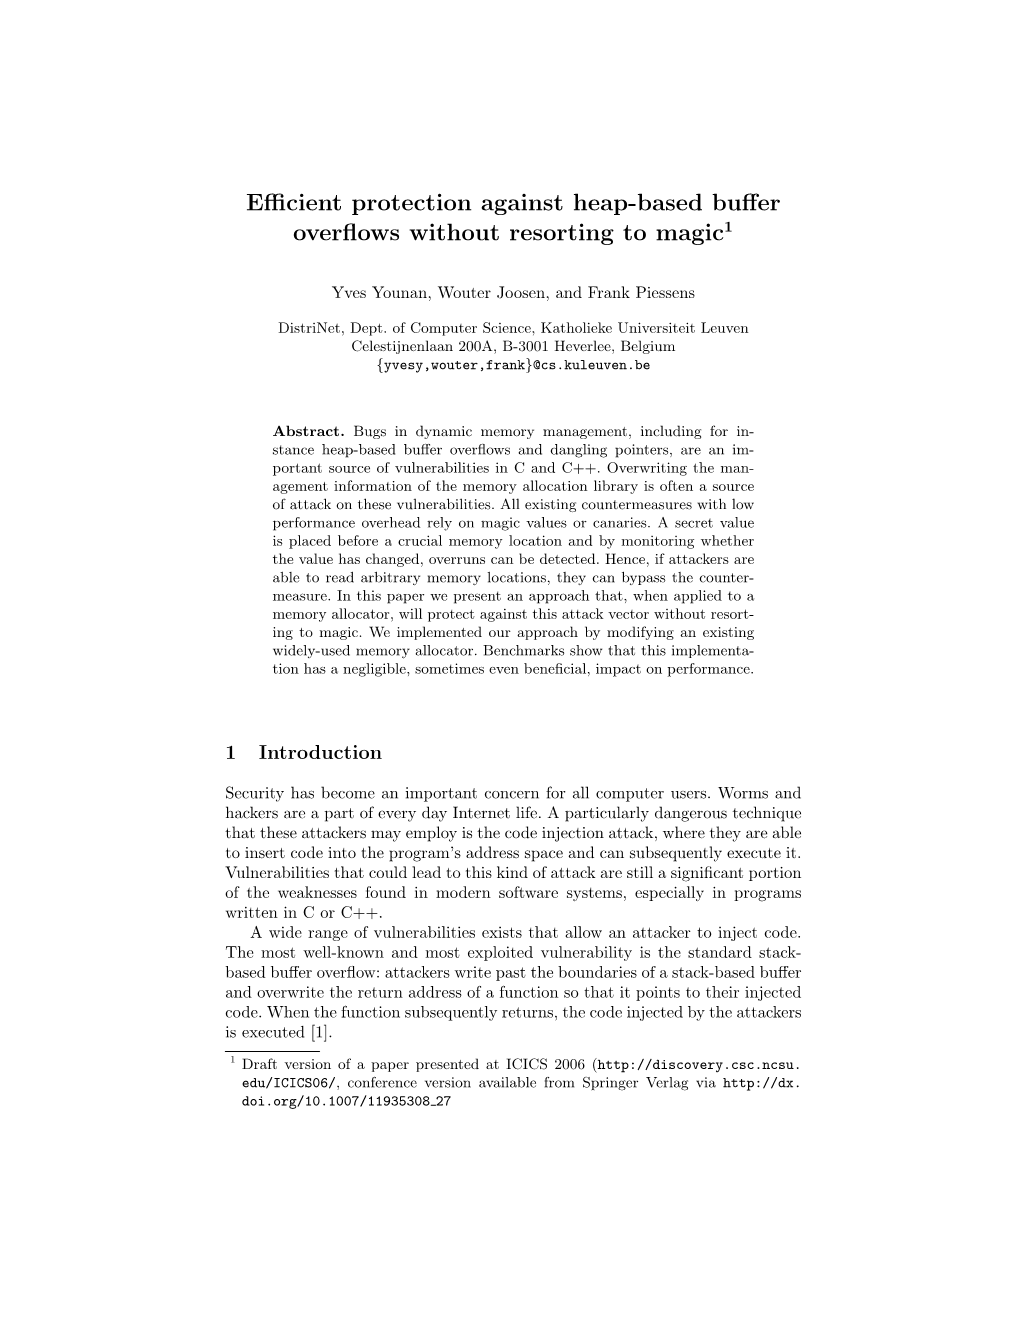 Efficient Protection Against Heap-Based Buffer